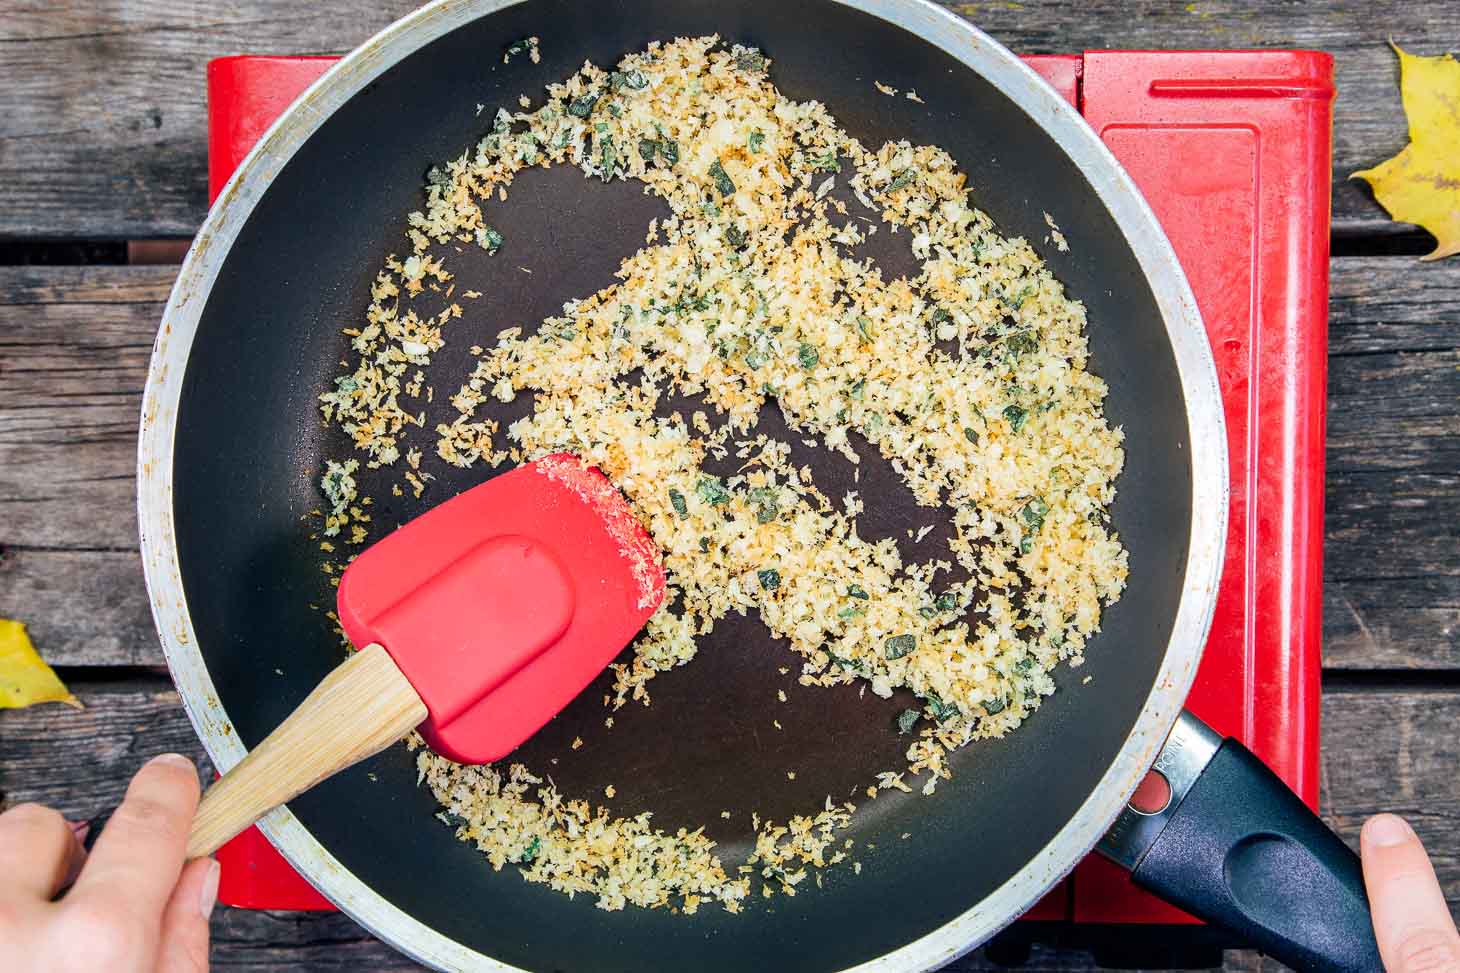 Toasting breadcrumbs in a skillet